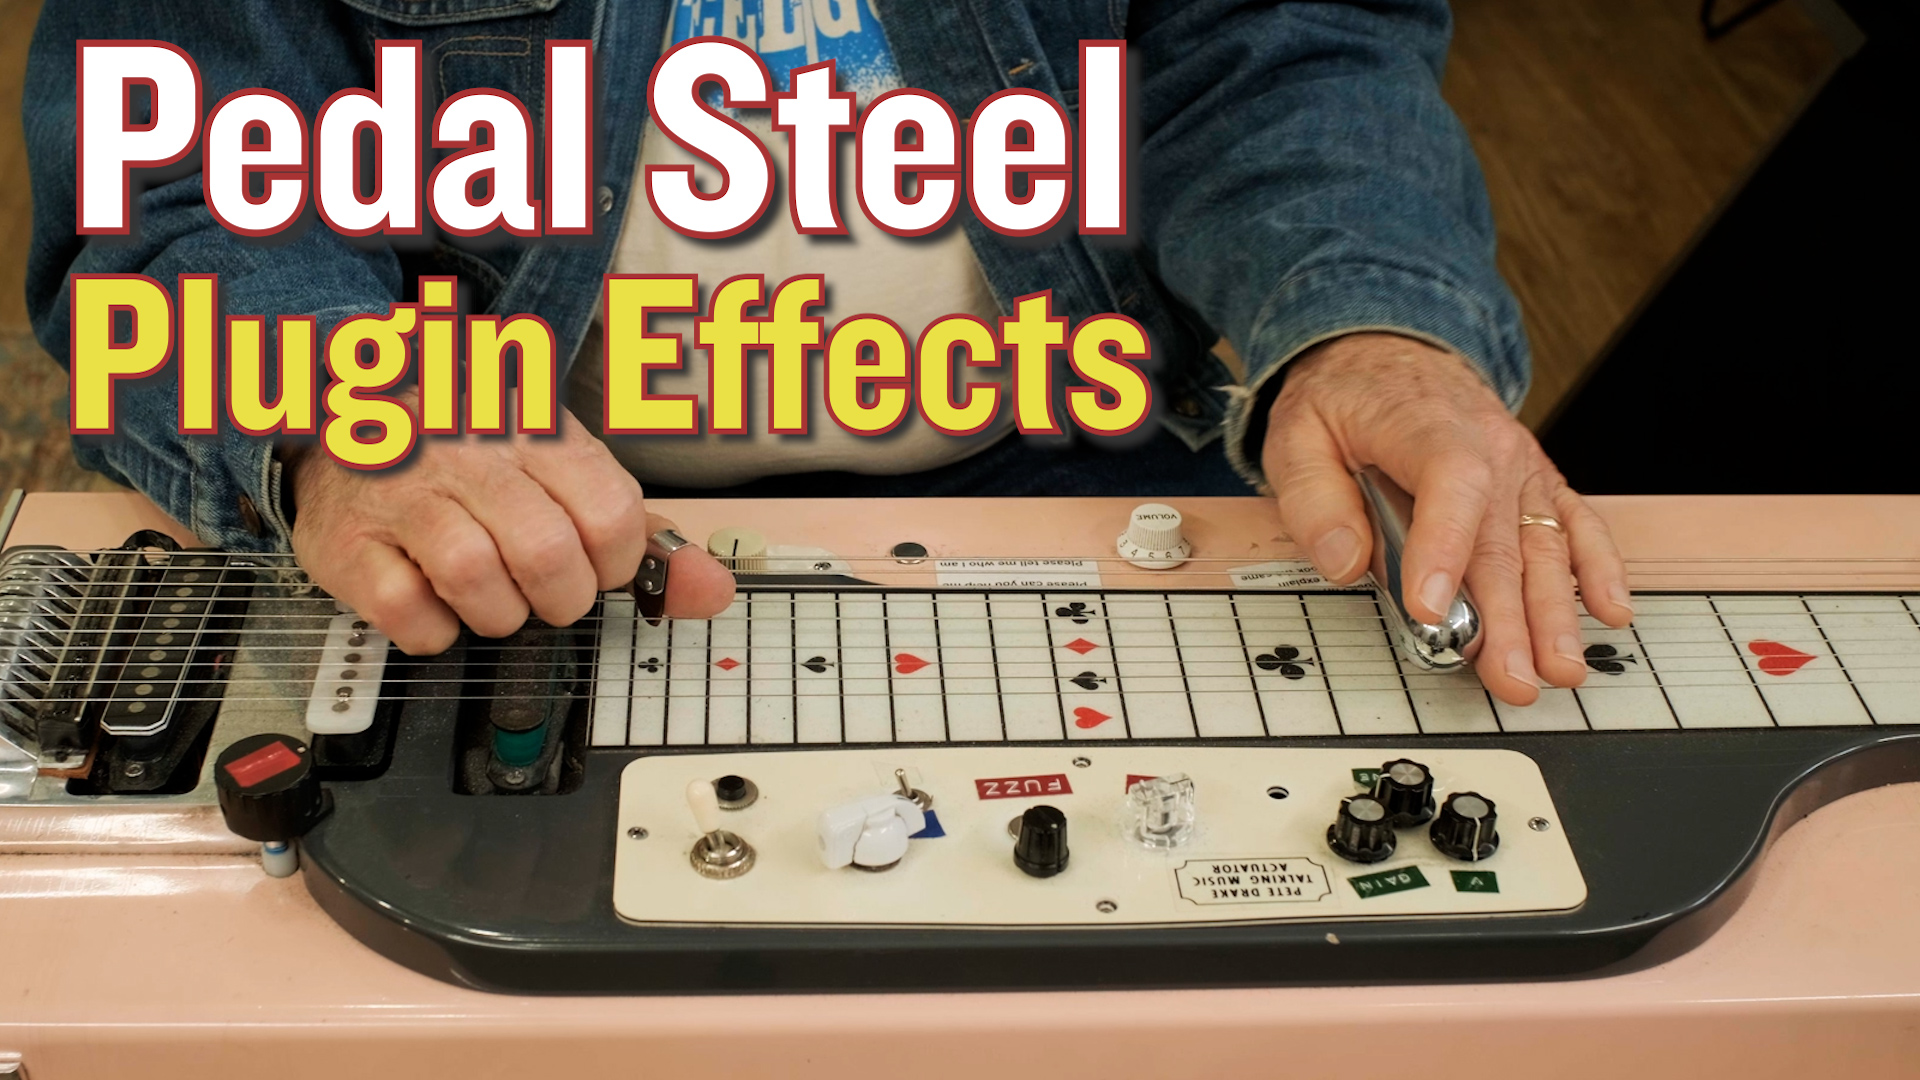 Pedal Steel Guitar Effects Masterclass (ft Russ Pahl and Soundtoys)